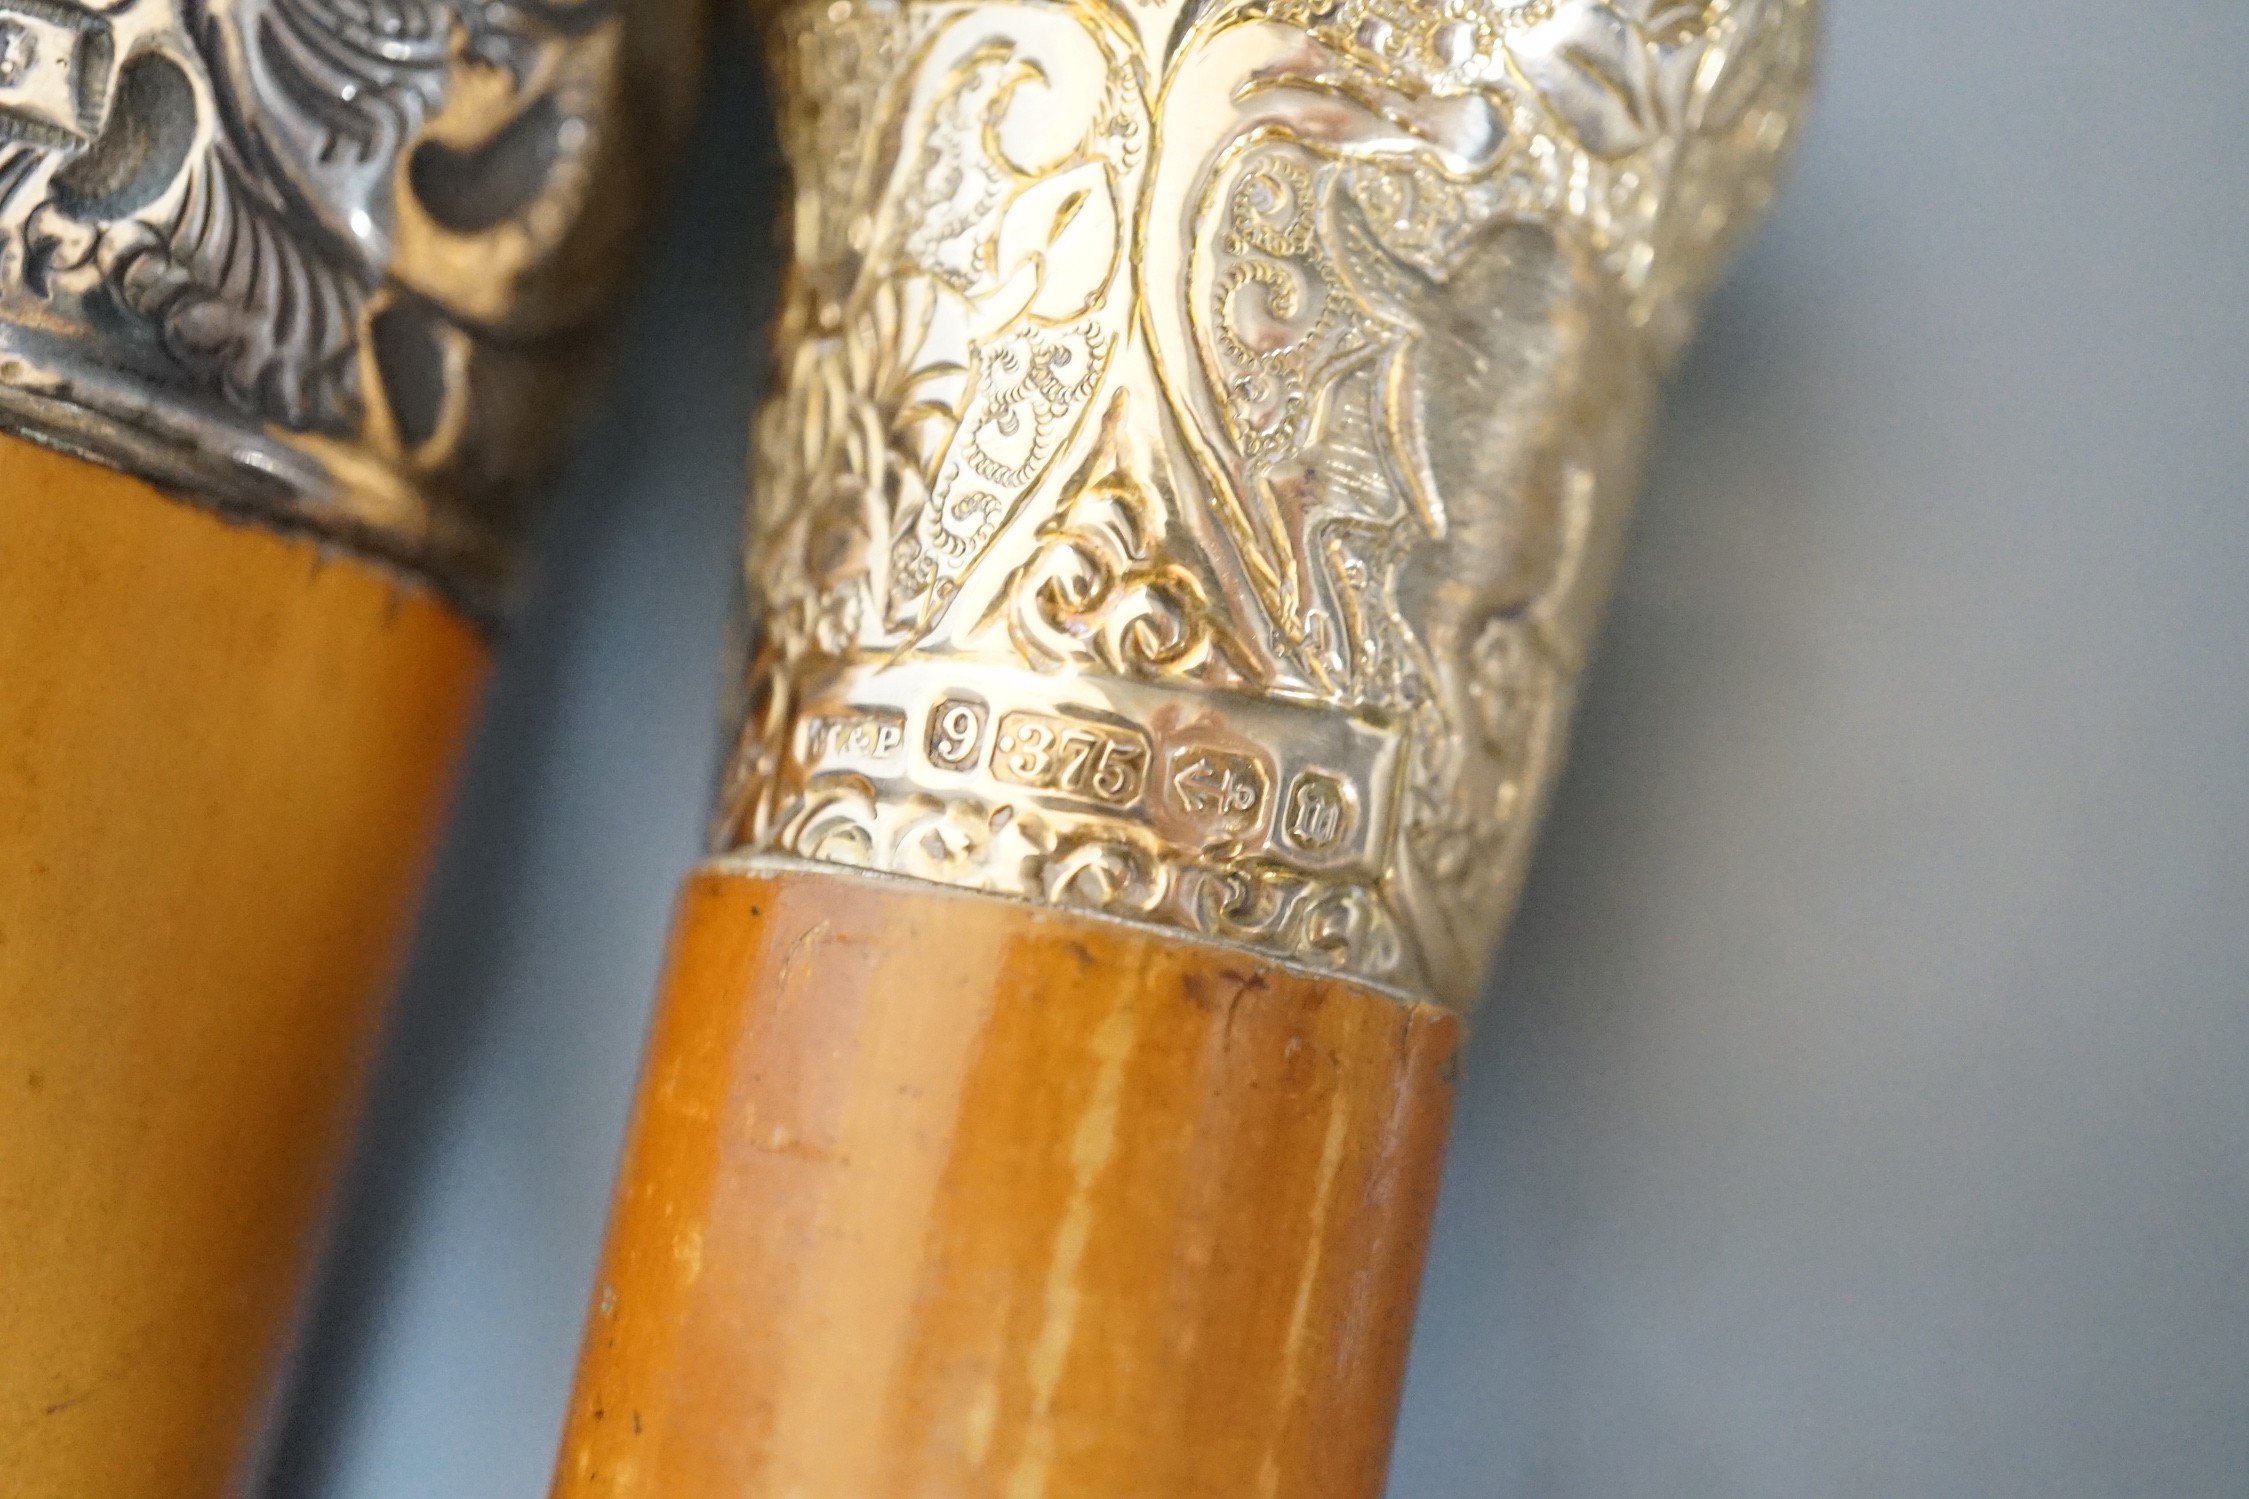 Two 19th century malacca walking canes: one with an Indian inspired 9ct gold handle, the other with a silver embossed handle, gold handled cane 92 cms long